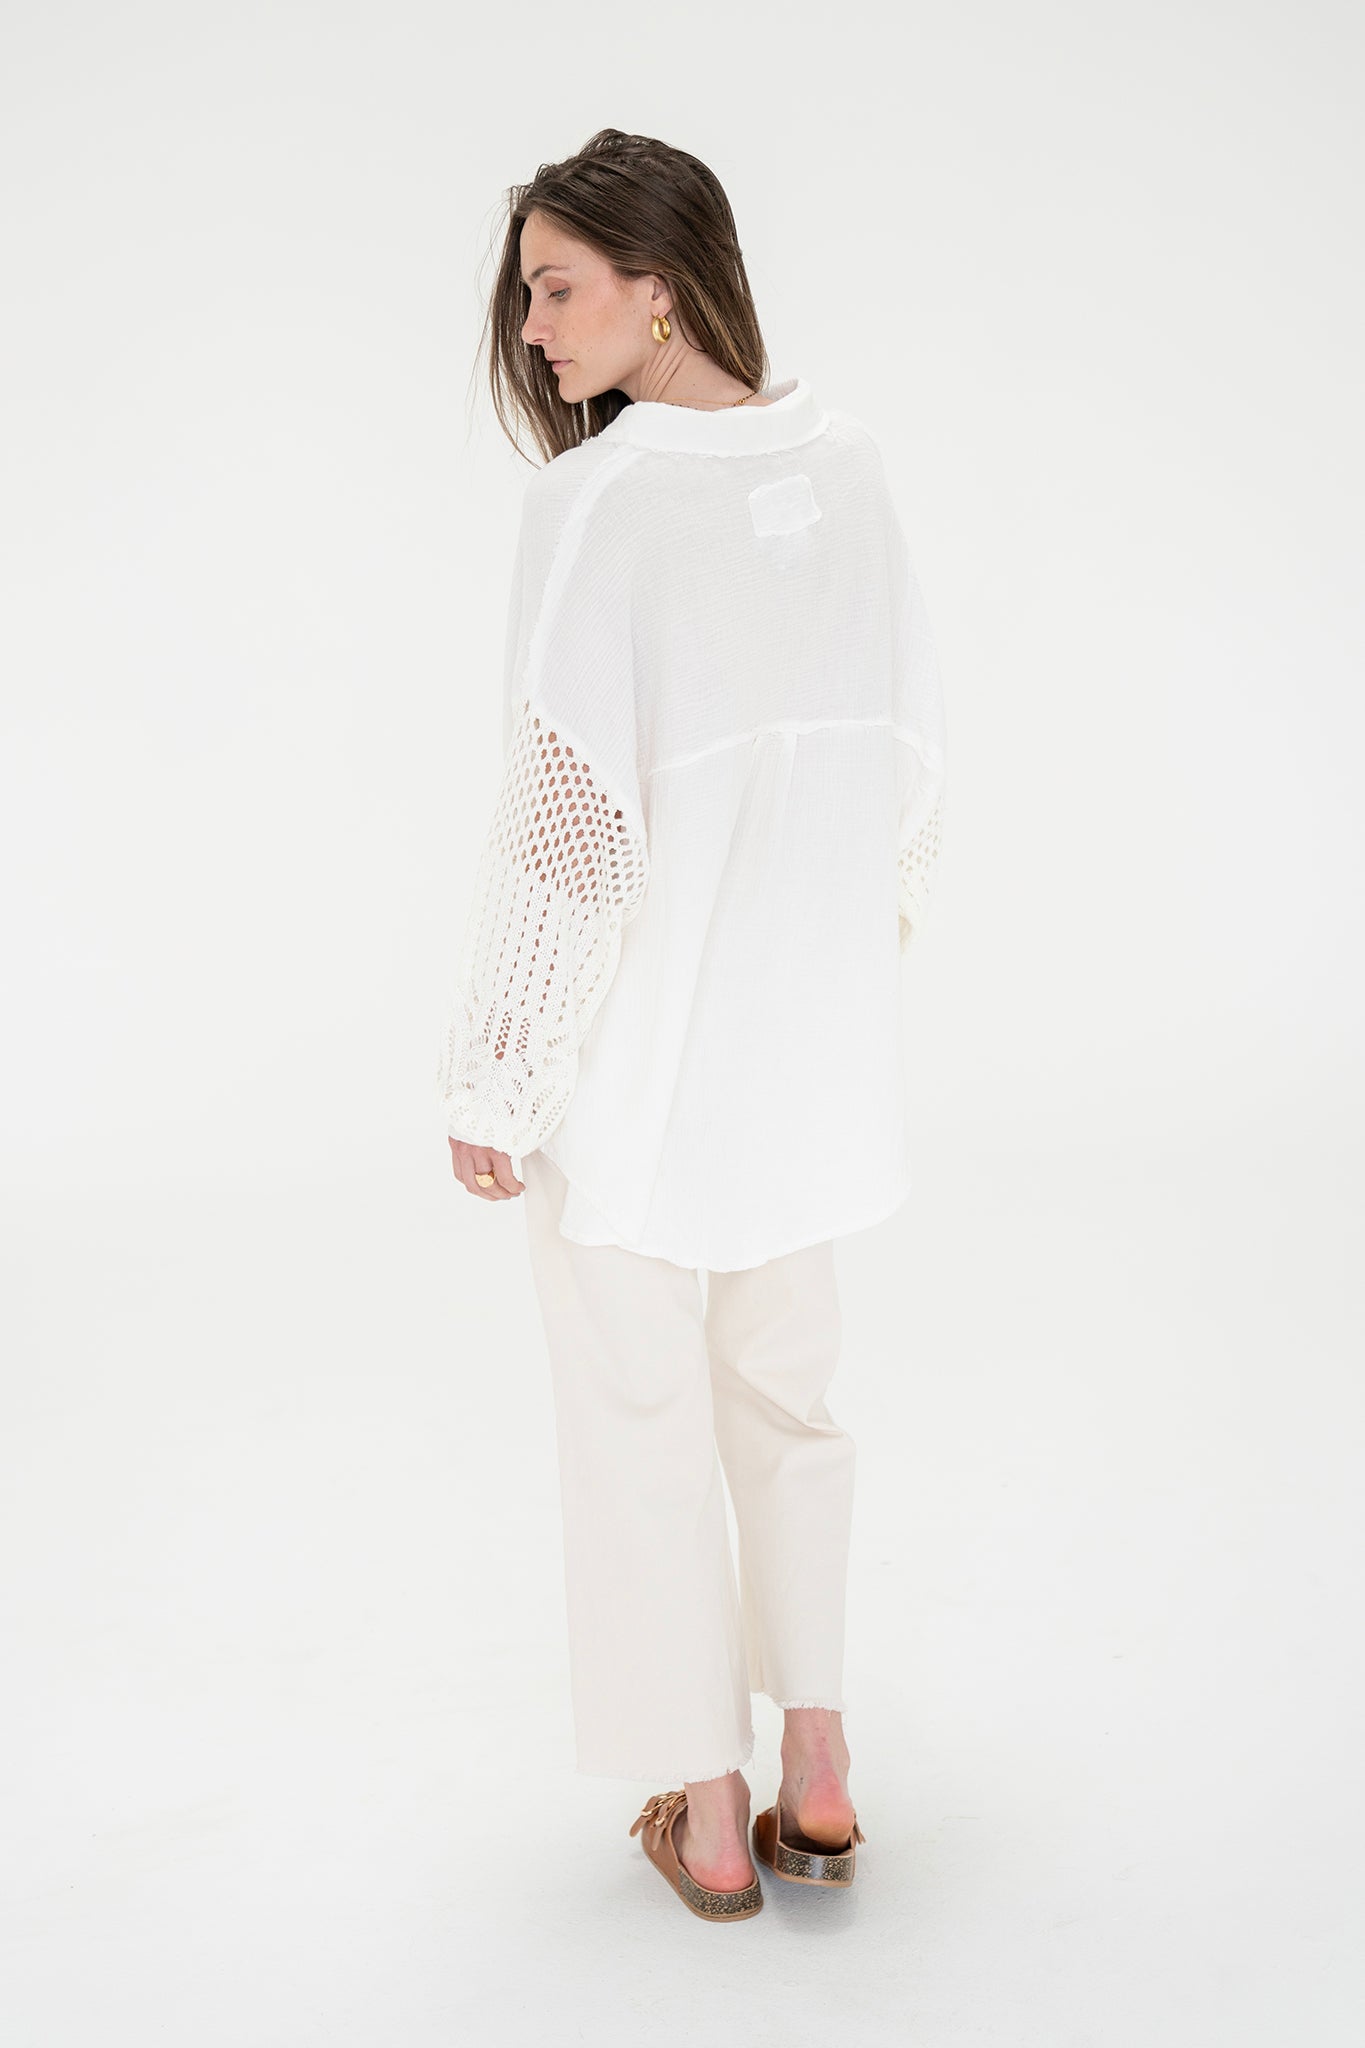 View 8 of Wisteria Cardigan in Off White, a Sweaters from Larrea Cove. Detail: .